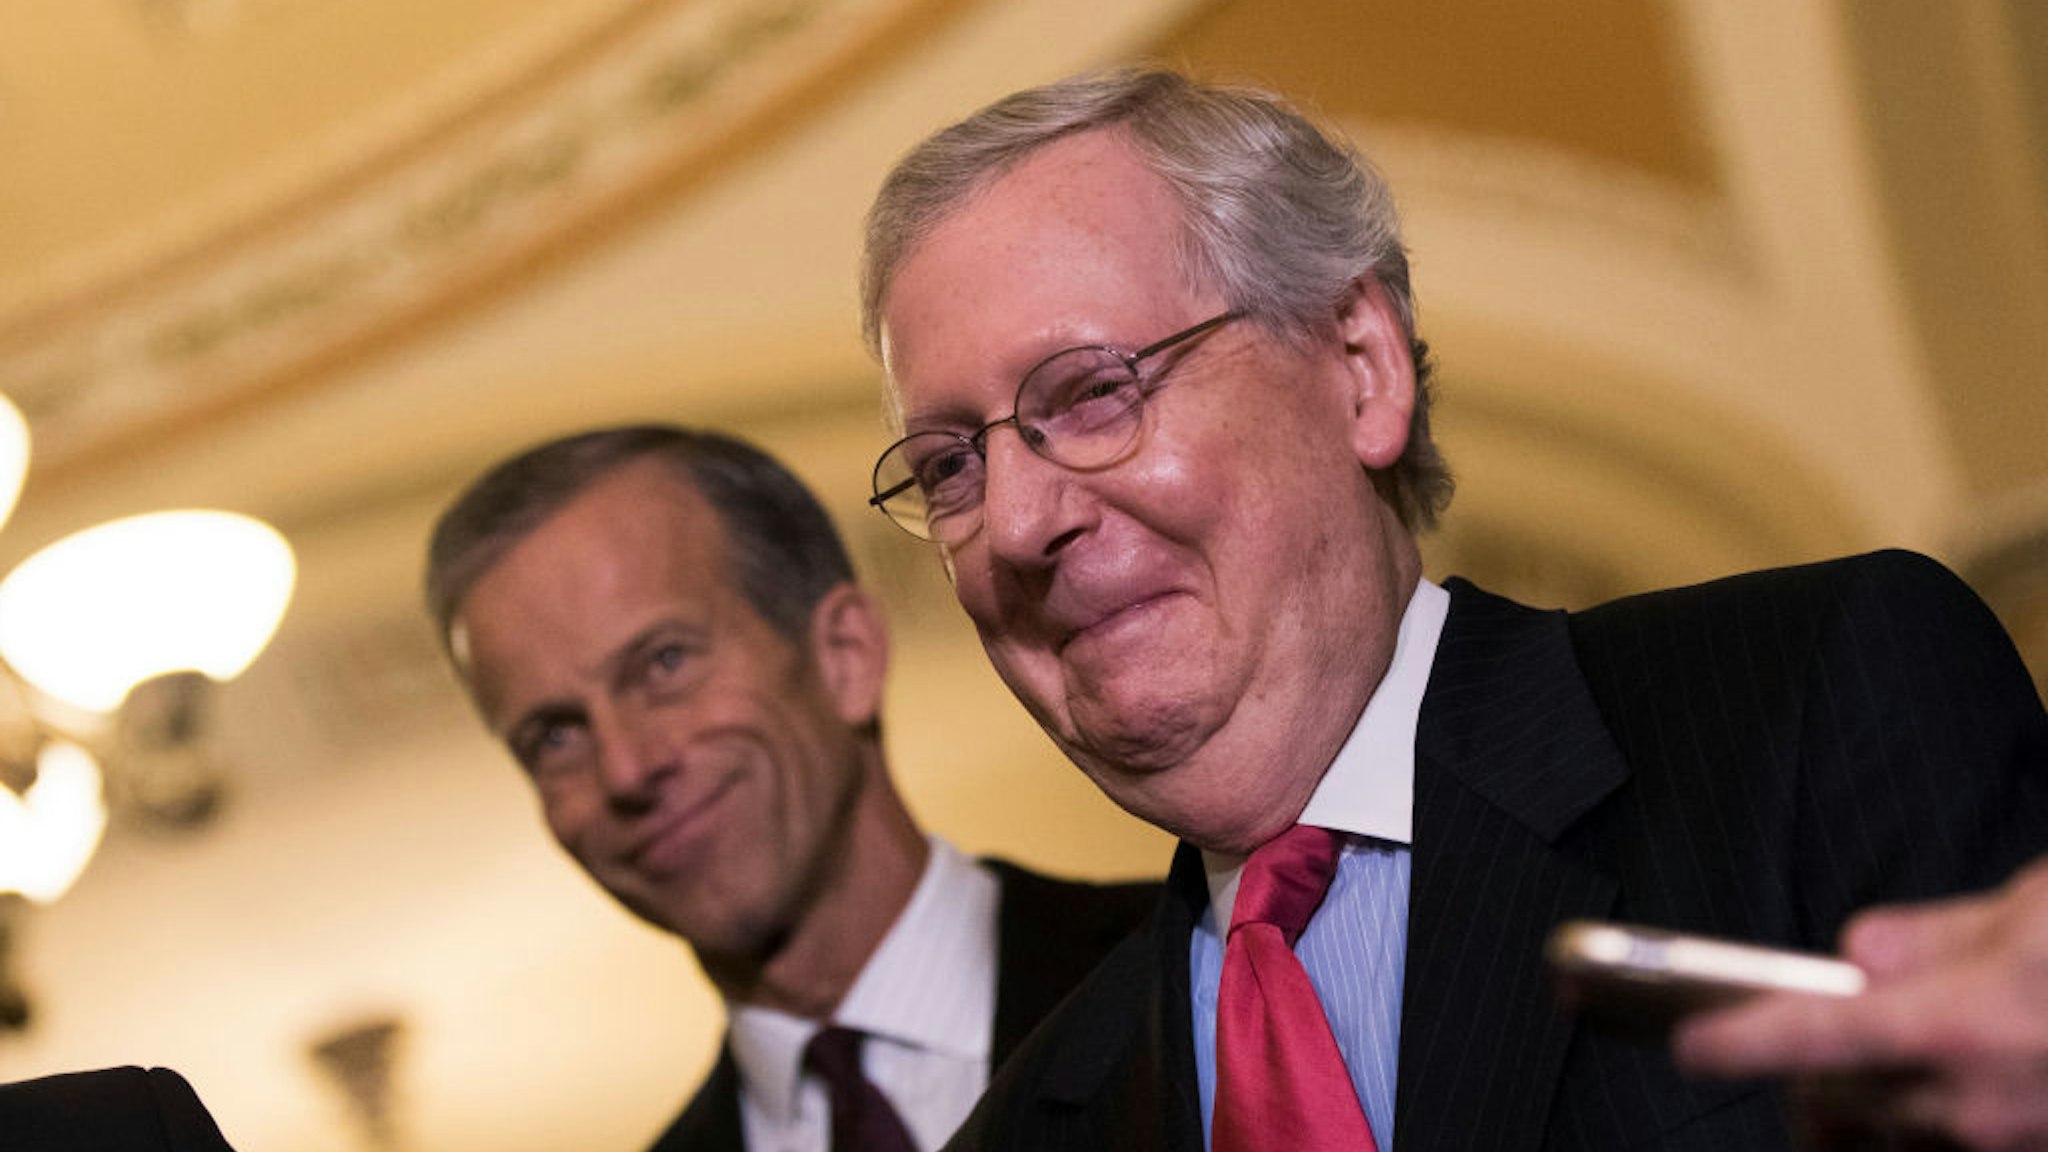 Mitch McConnell (R-KY) smiles after addressing reporters following a lunch with Senate Republicans.